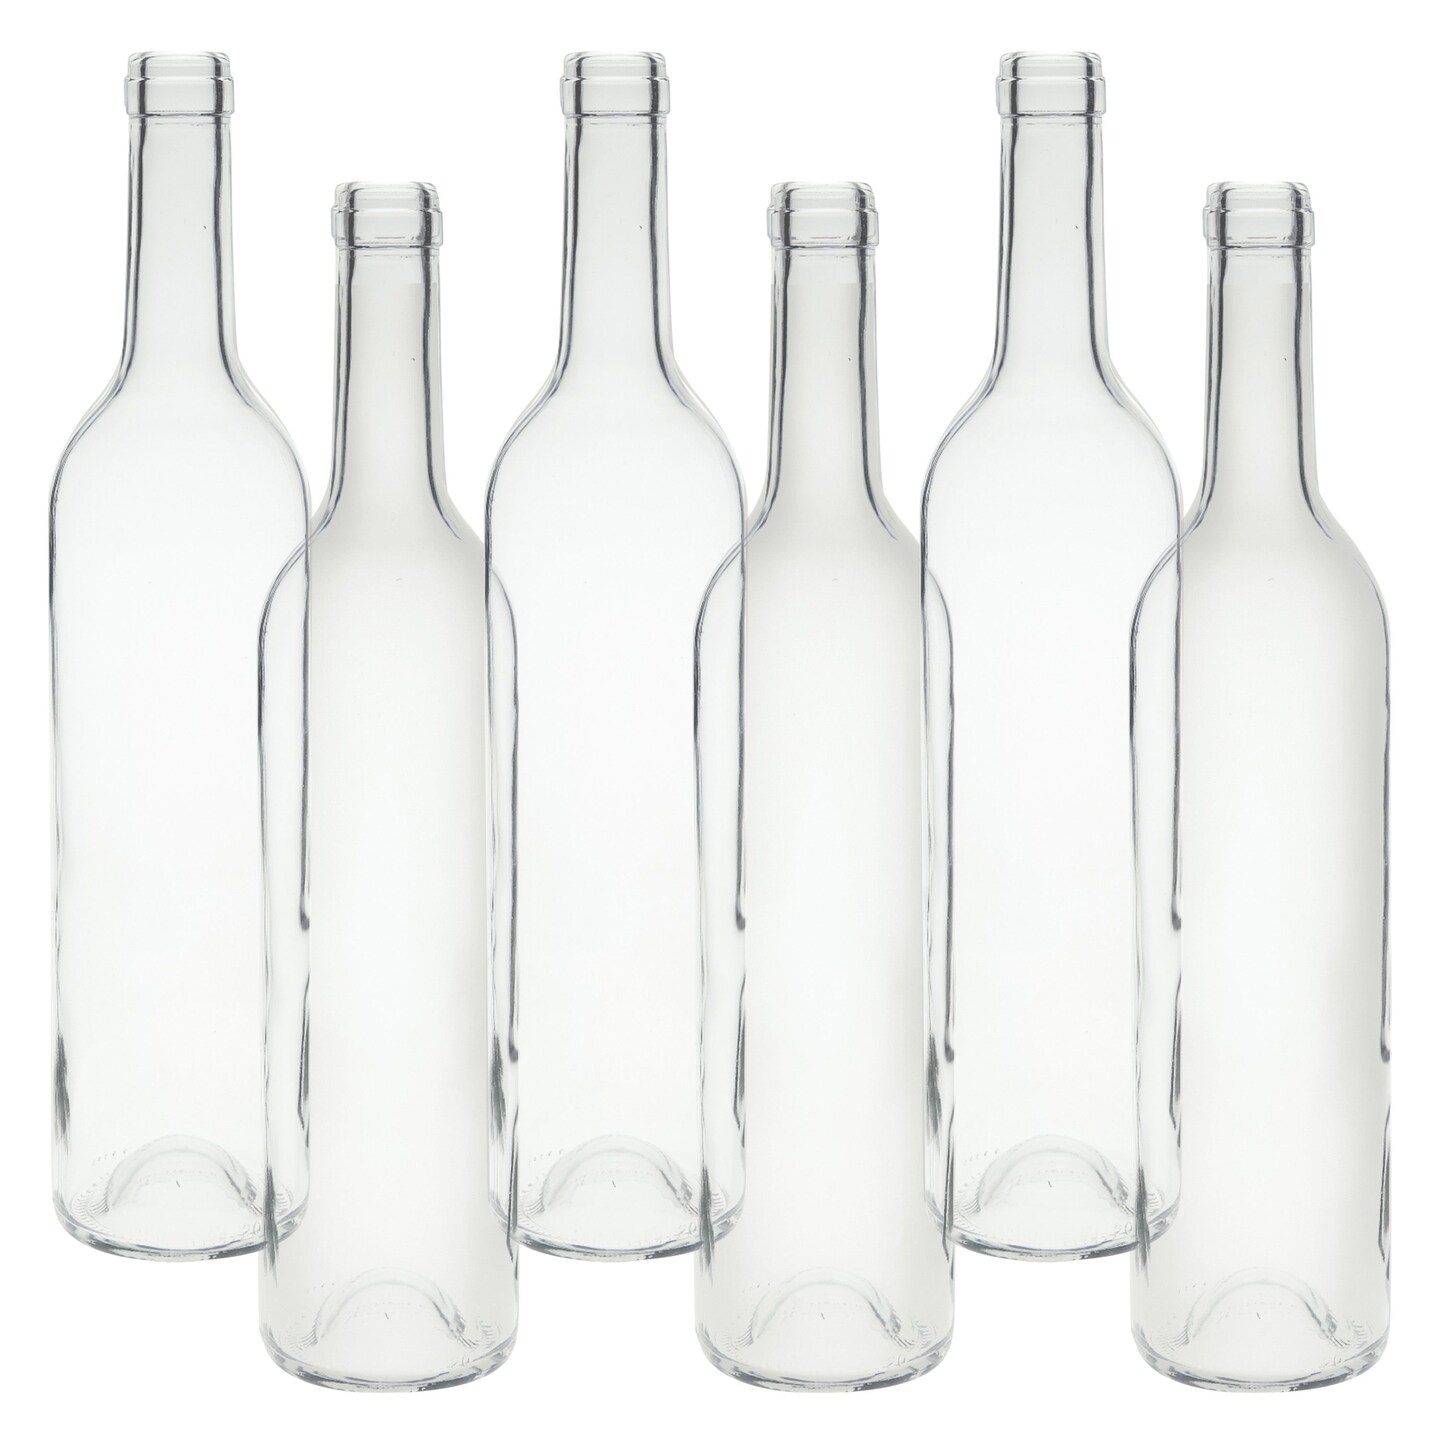 6 Pack Empty Wine Bottles for Kitchen Counter, Home Decor, Crafts, Clear Transparent Glass Bottles for Bar Accessories (750ml, 12.75 In)